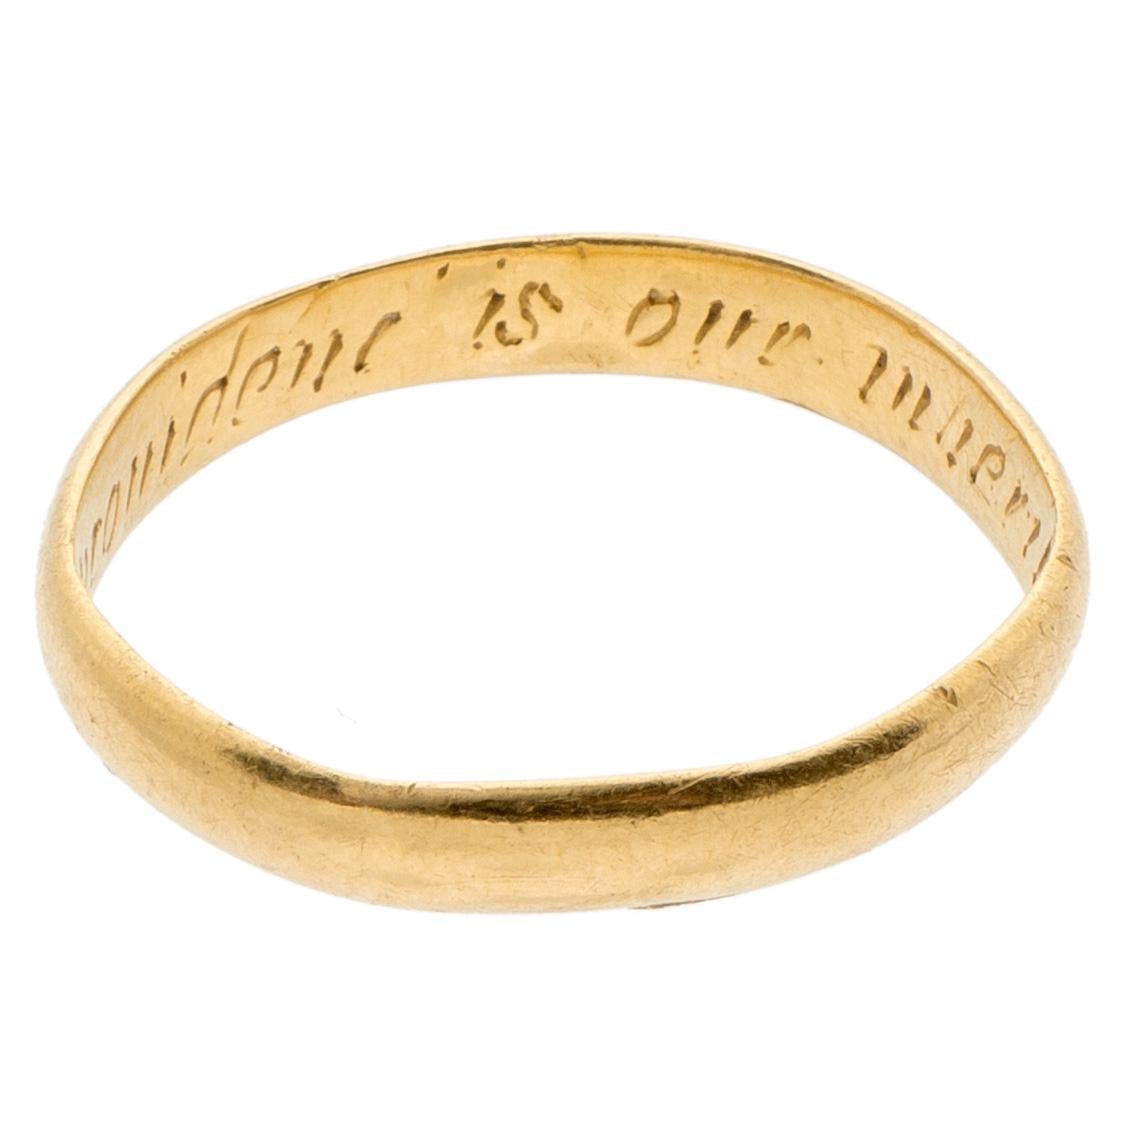 POSY, “GOD’S PROVIDENCE IS OUR INHERITANCE” 
England, 17th century
Gold
Weight 2.5 gr.; circumference 55.3; US size 7½; UK size P 

The interior of this delicate, D-section gold band bears the inscription, “God’s providence is our inheritance,” in a